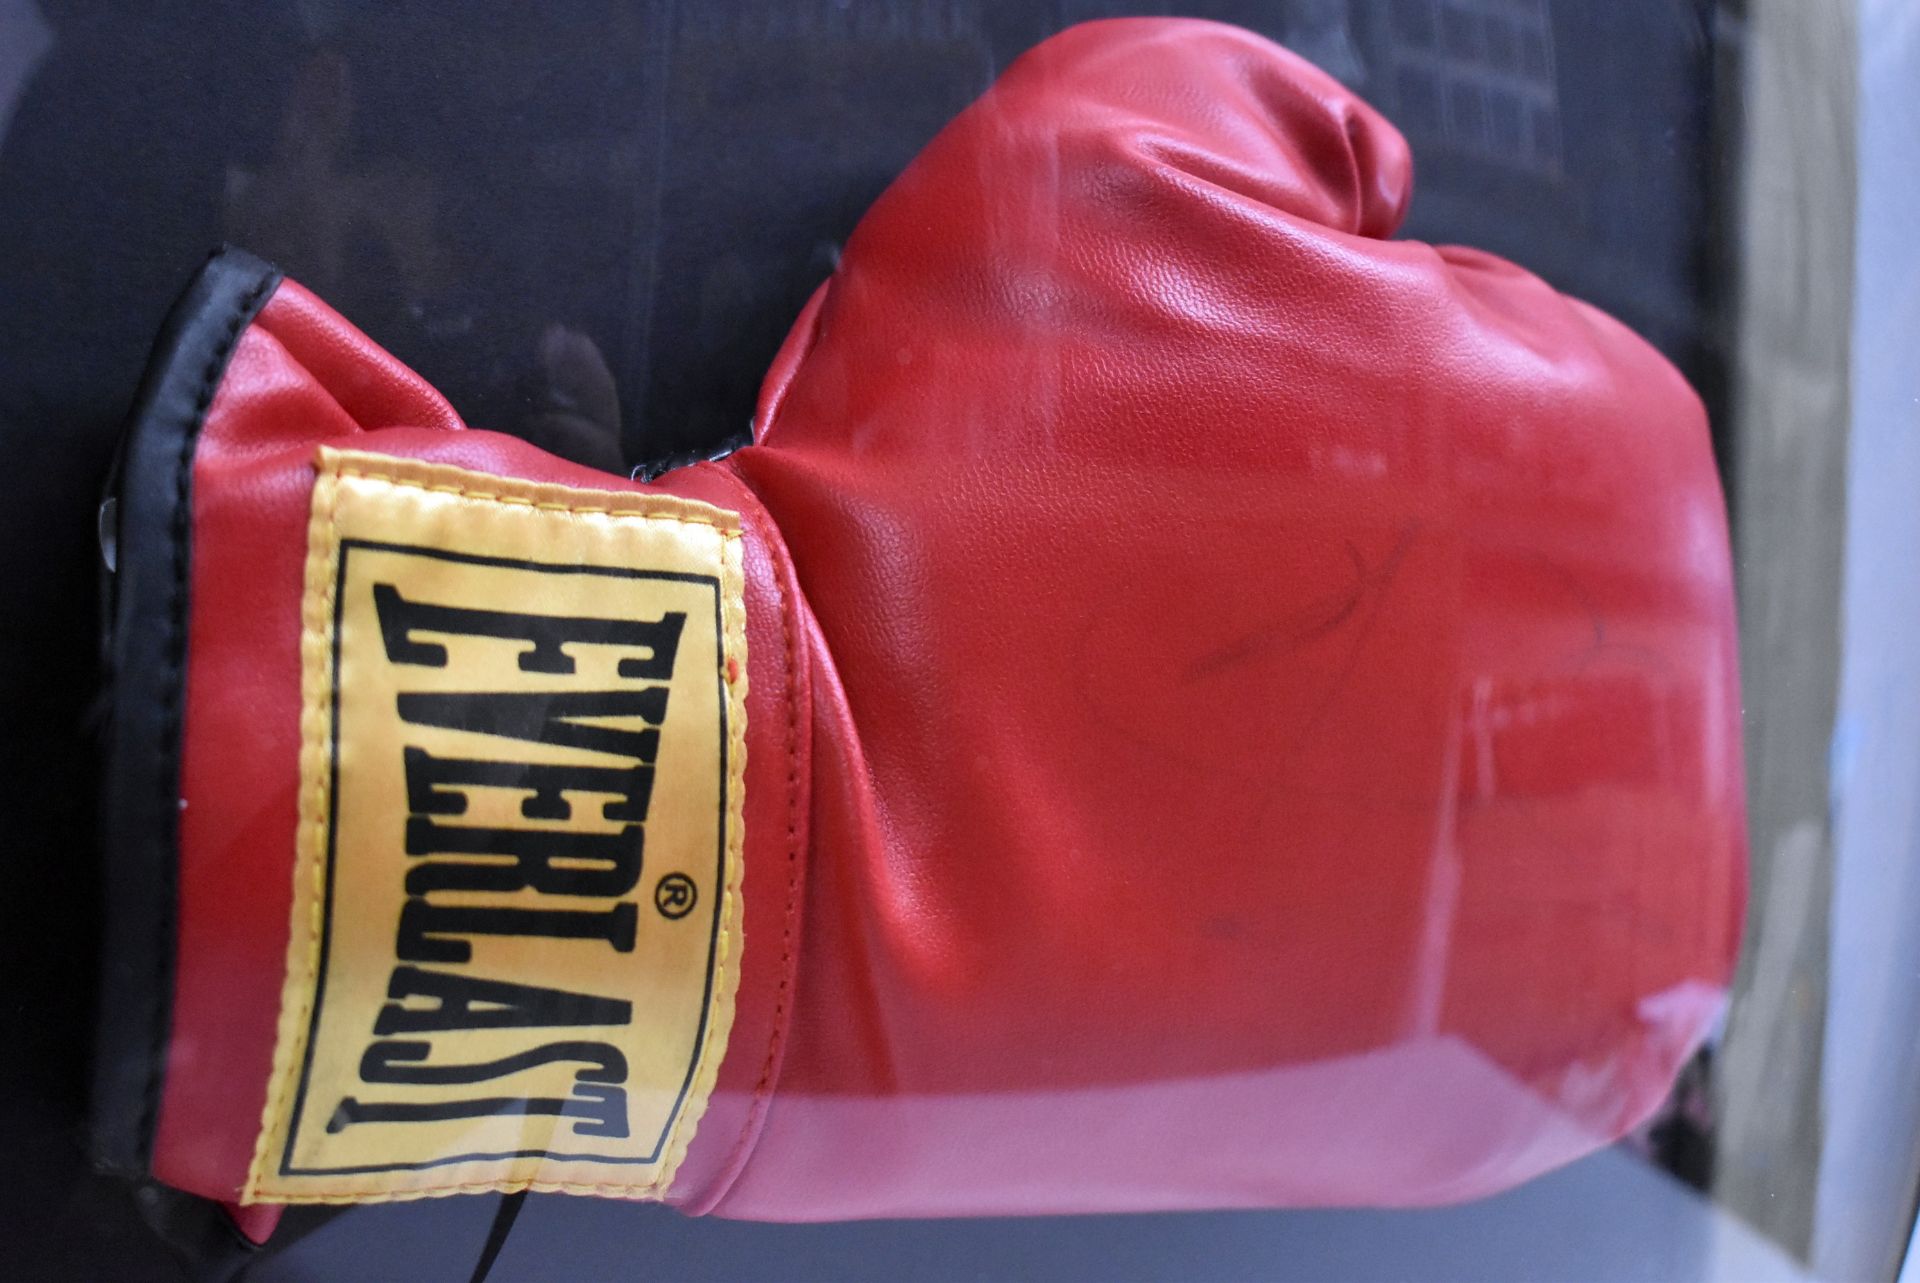 1 x Signed Autographed JOE CALZAGHE Everlast Boxing Glove In Red - Image 2 of 4